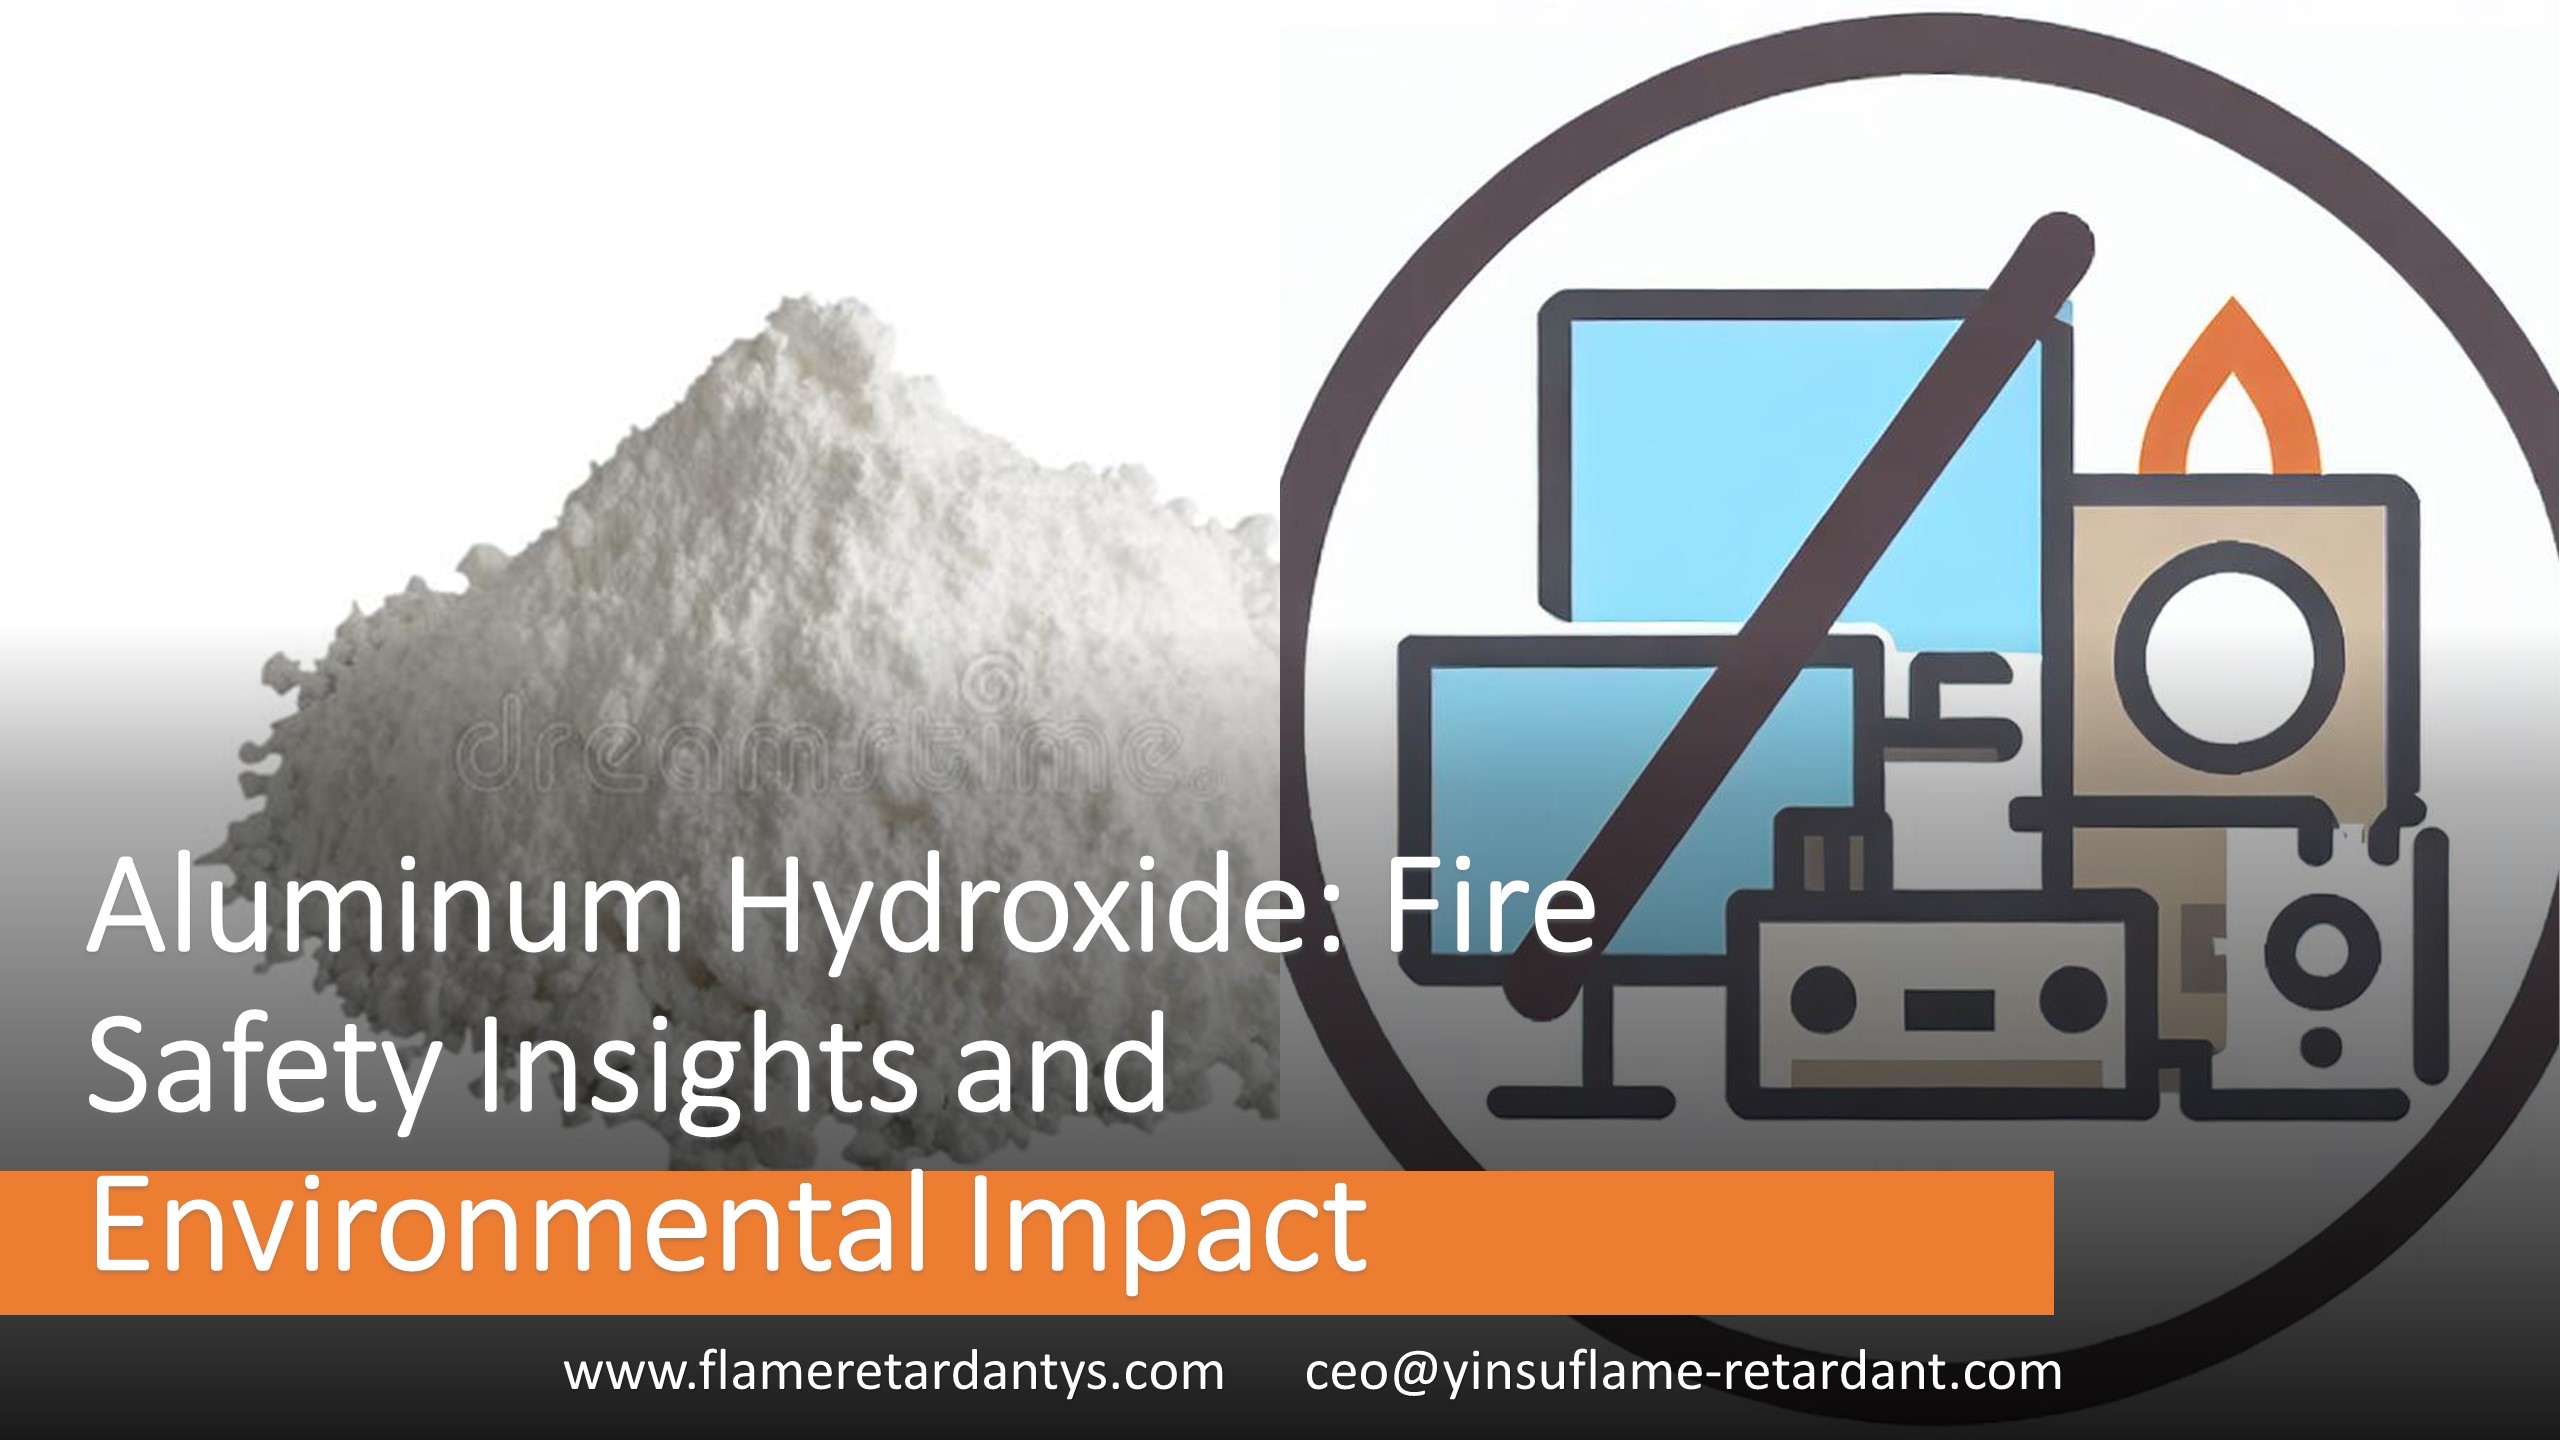 Aluminum Hydroxide Fire Safety Insights and Environmental Impact